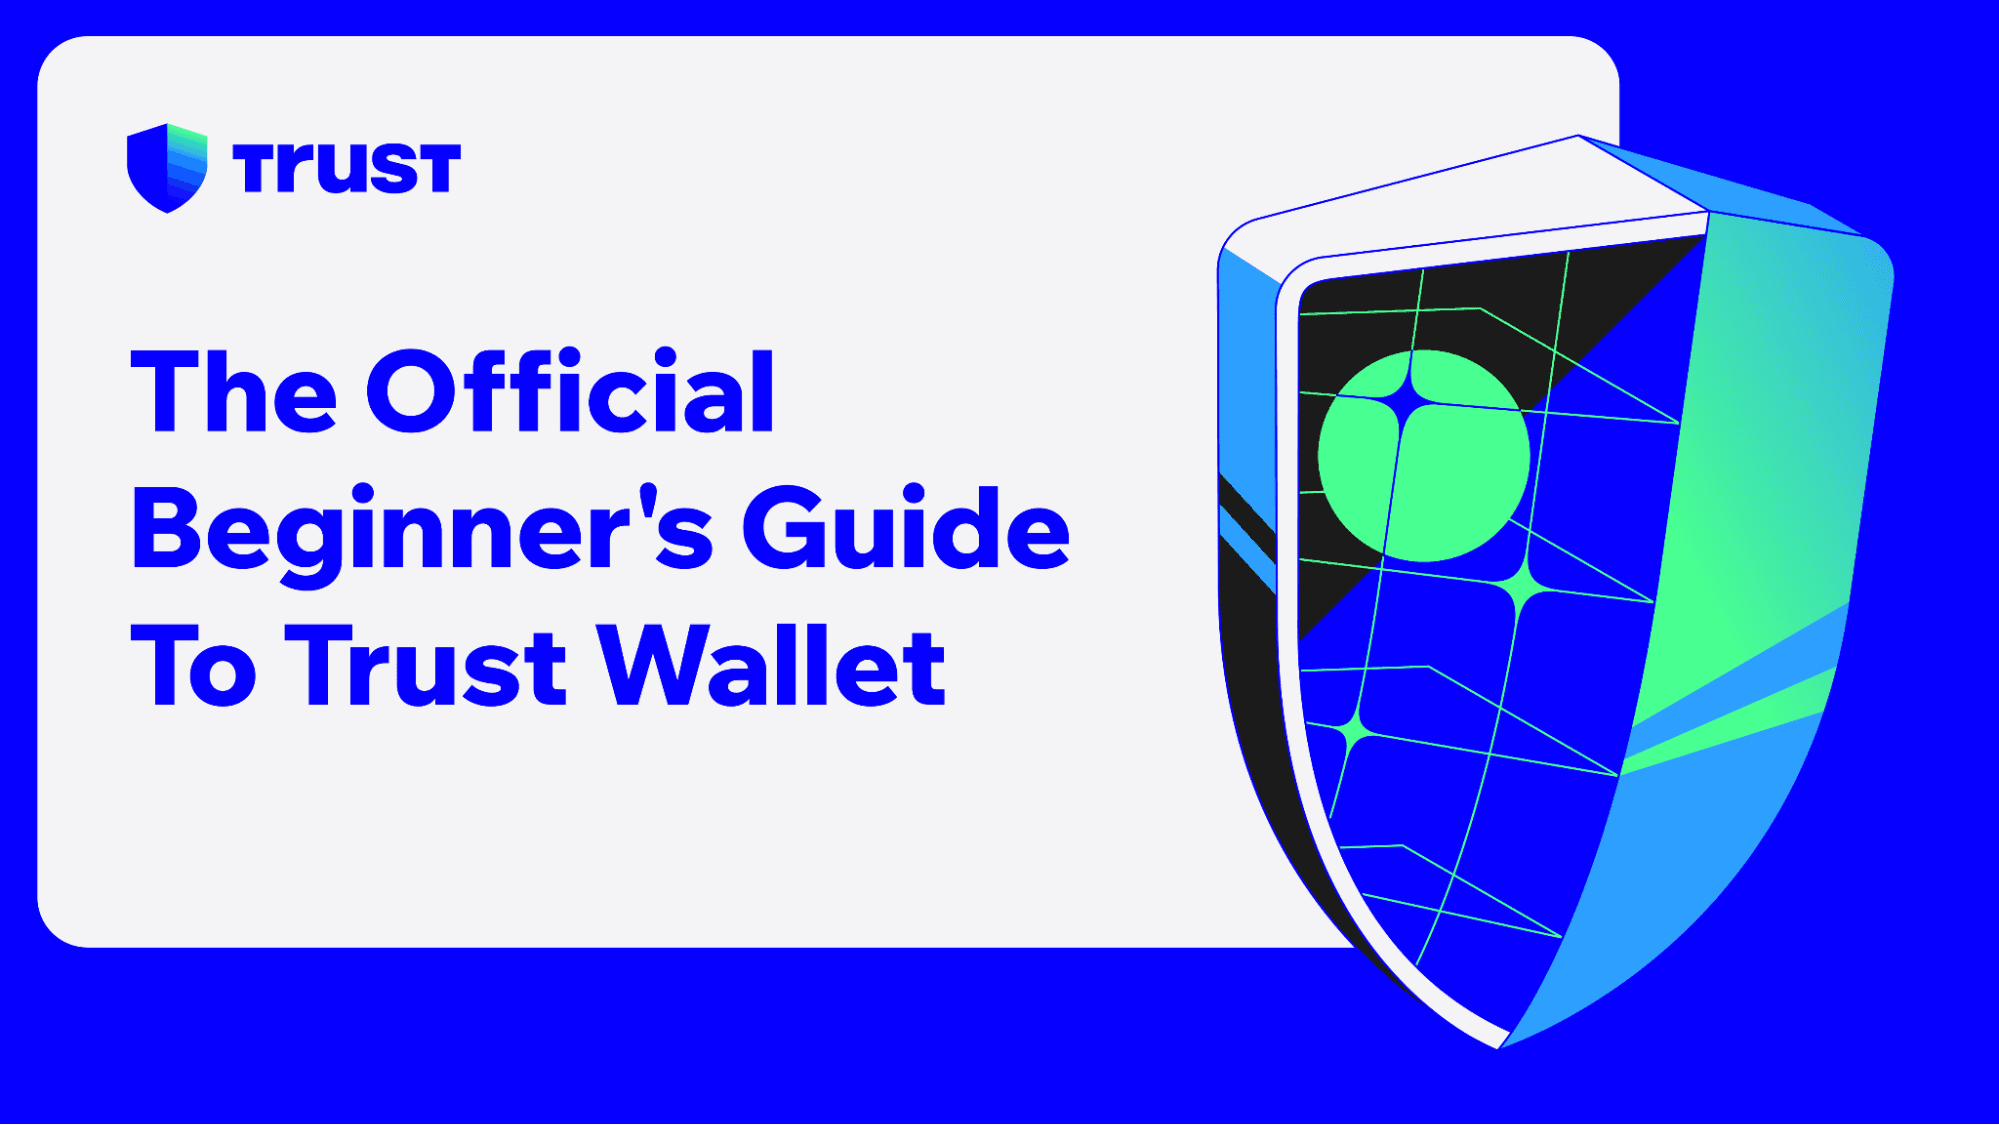 The Official Beginner's Guide To Trust Wallet